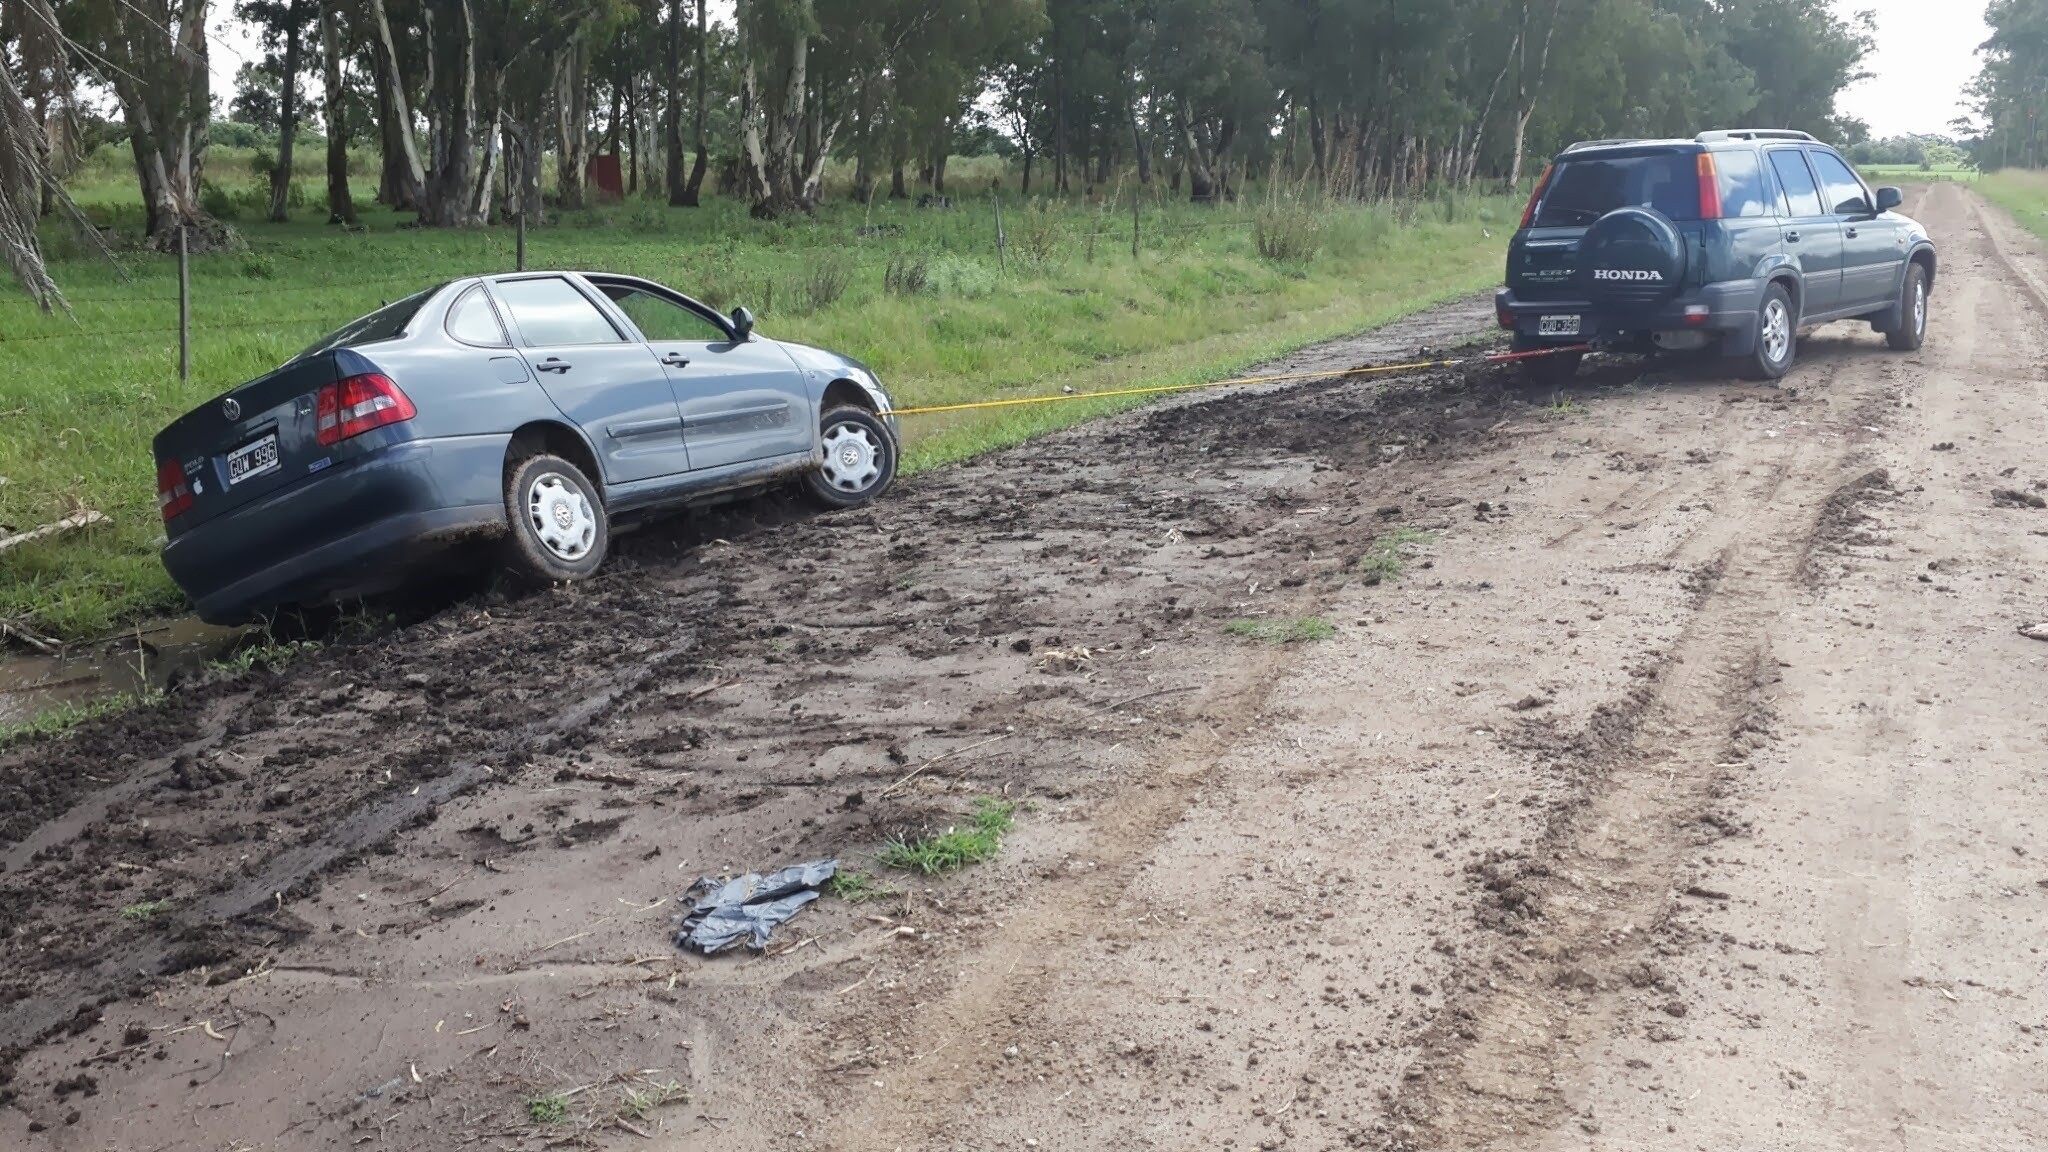 What to Do When Your Car Gets Stuck in The Mud?